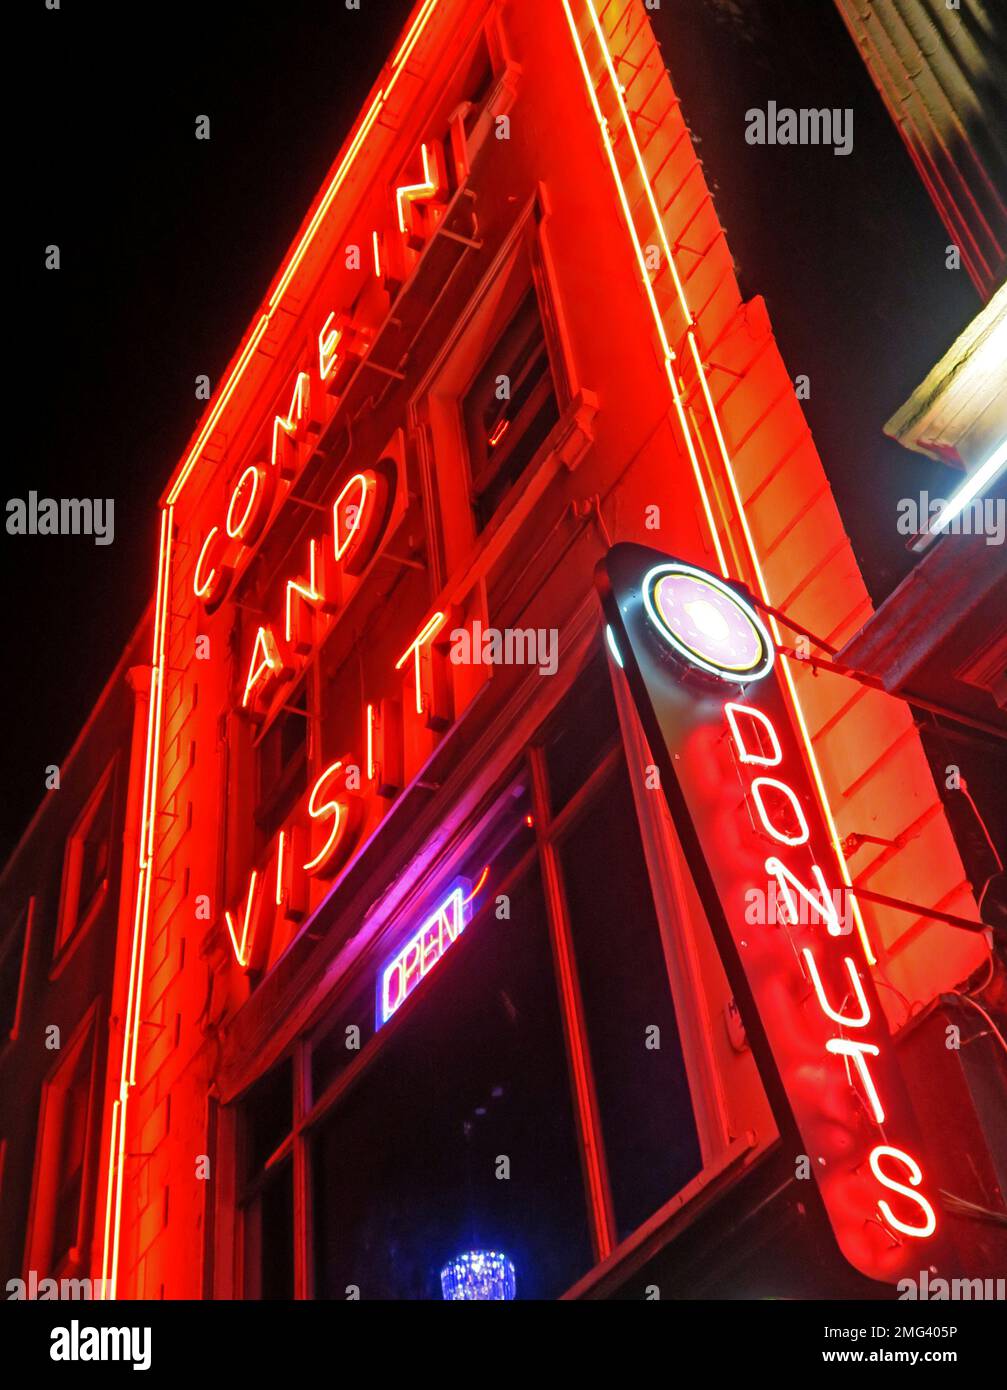 Donuts, Come in and visit, red neon sign at night, Dublin, Eire, Ireland Stock Photo